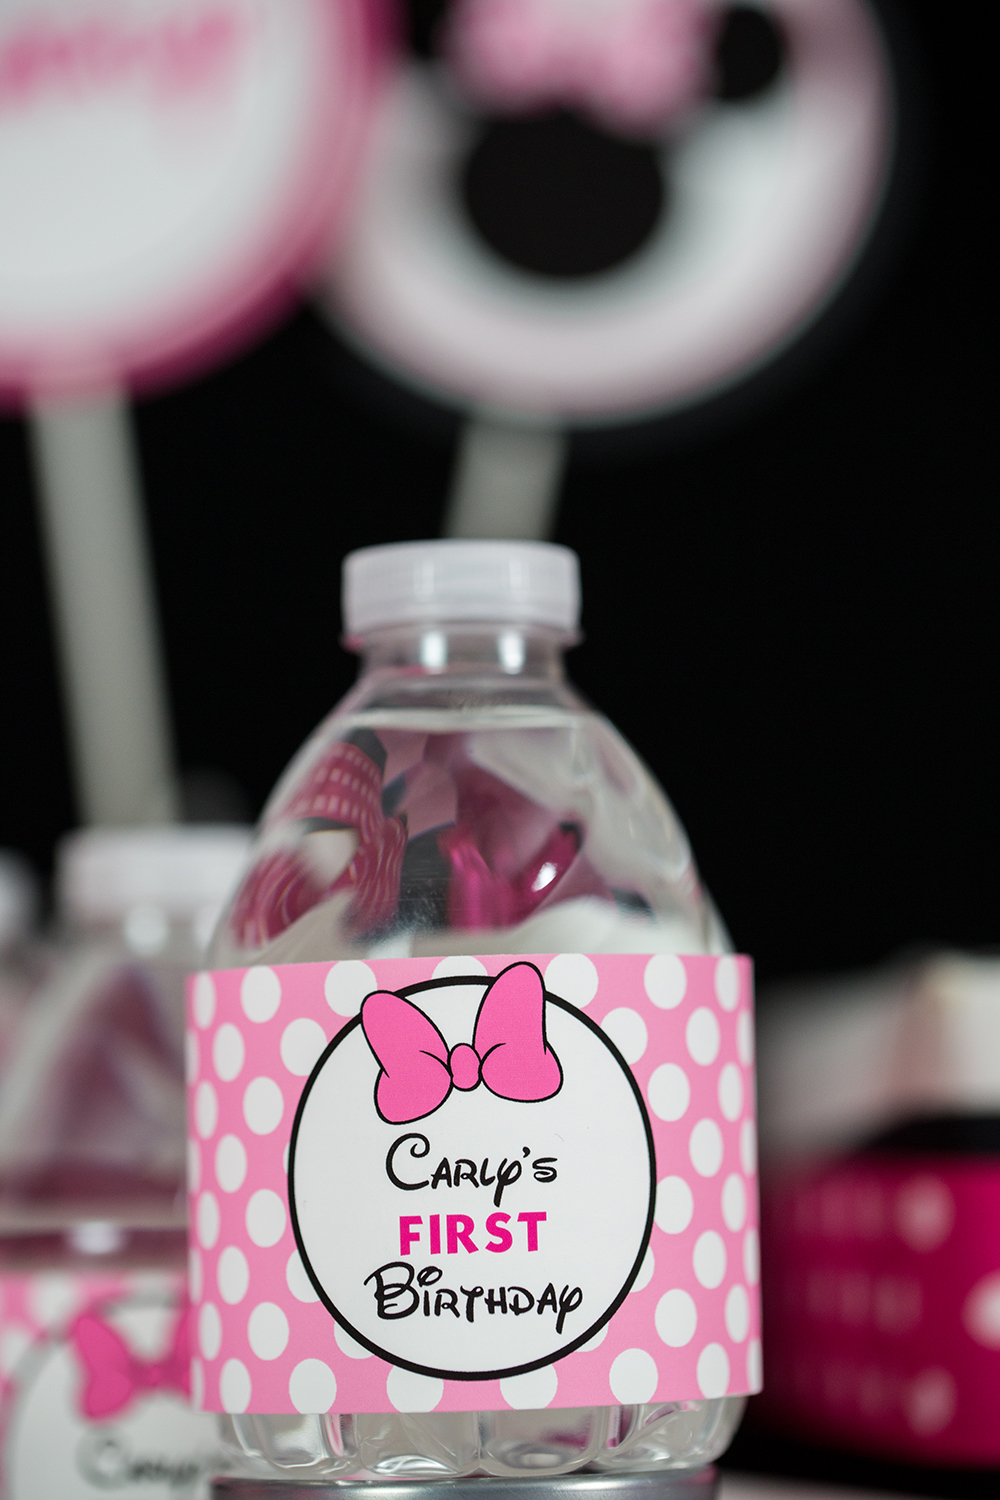 Instant Download Minnie Water Bottle Labels Pink Minnie Party Supplies  Minnie Polka Dots Birthday Party Minnie for Ever Decorations MPKD 